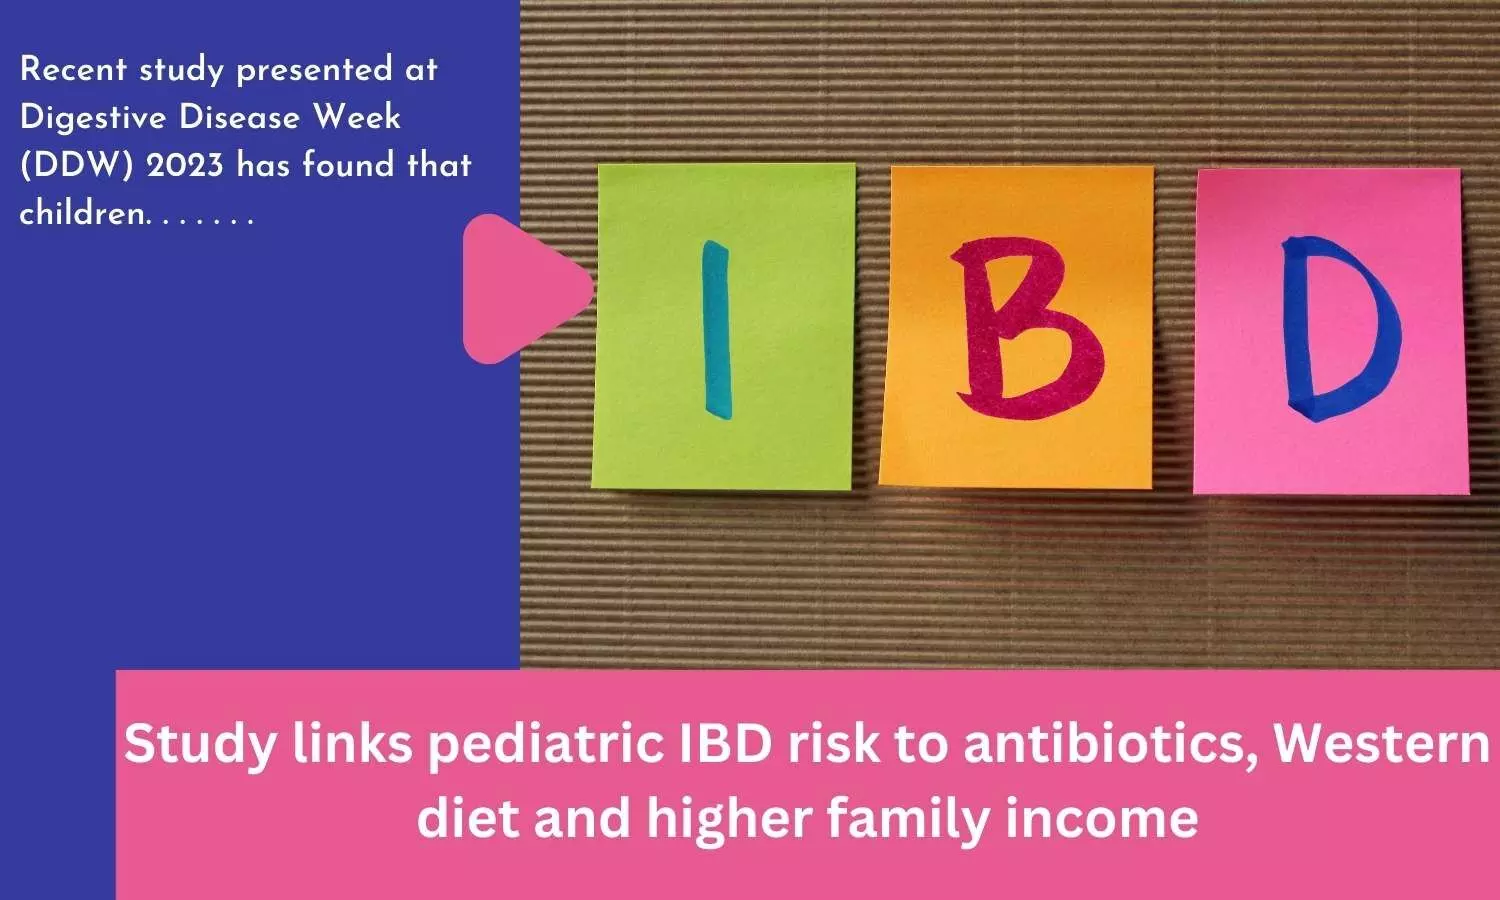 Study links pediatric IBD risk to antibiotics, Western diet and higher family income